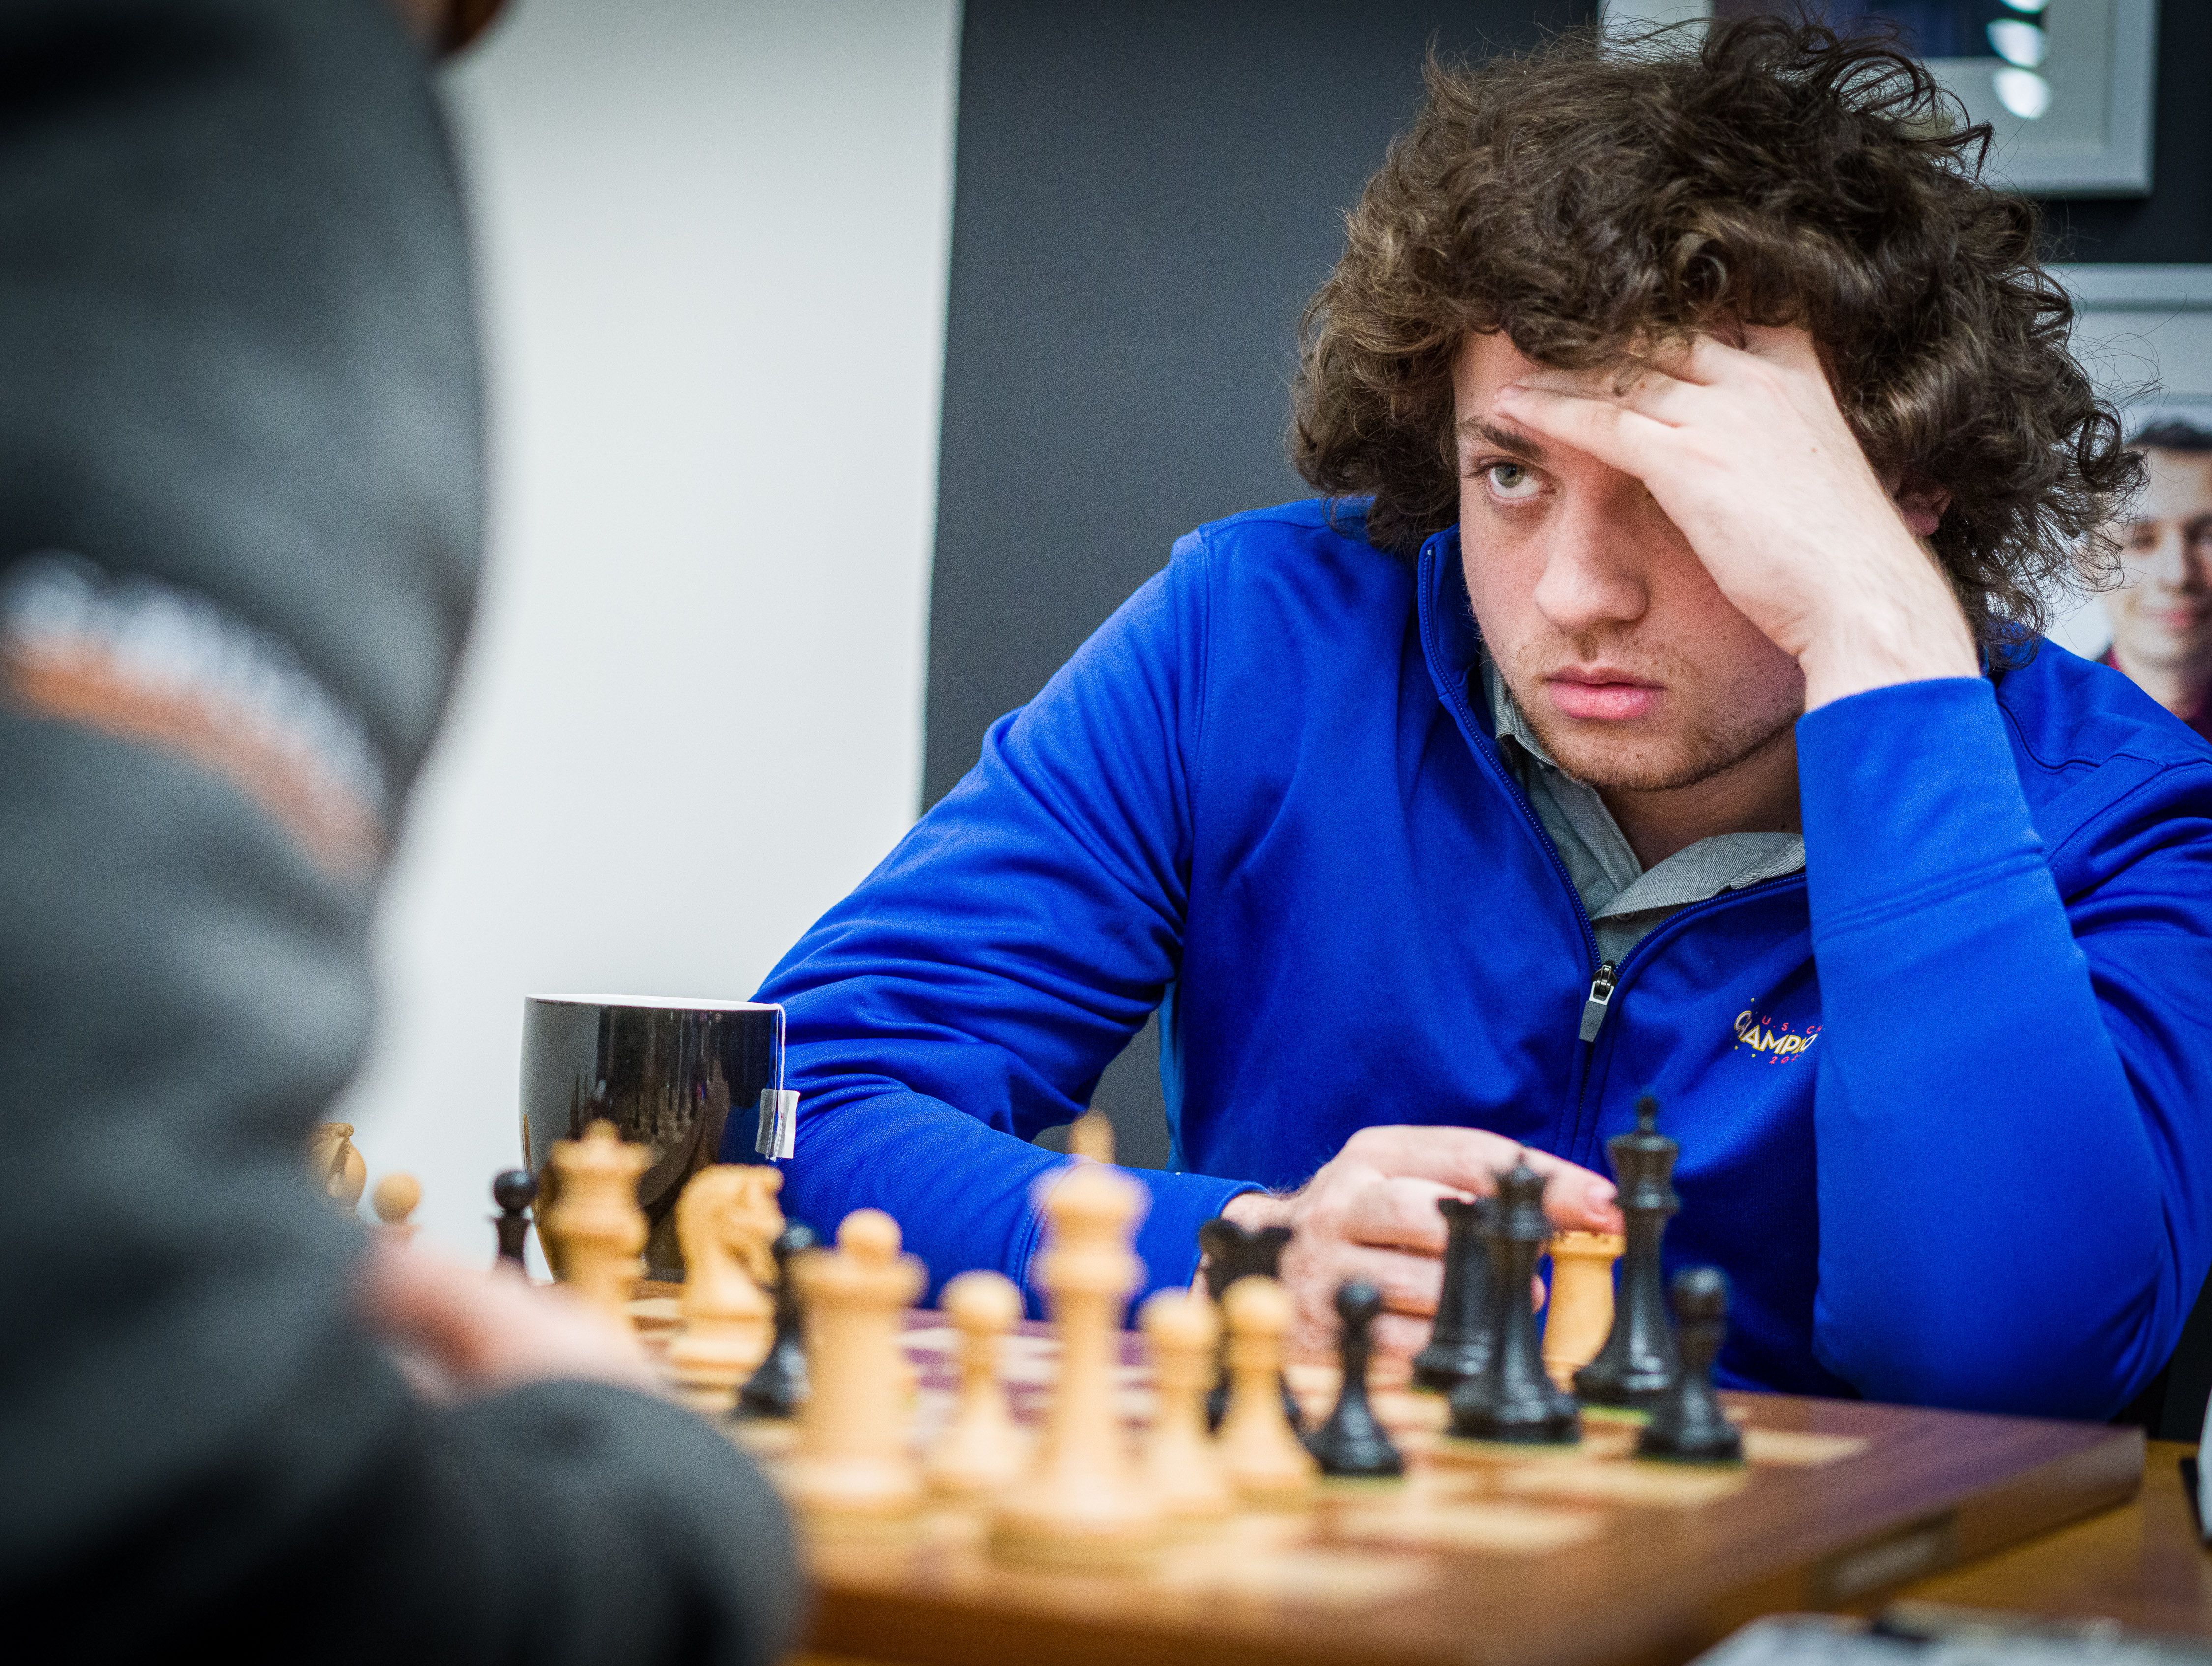 This is my experience playing at a chess tournament 2019. You will